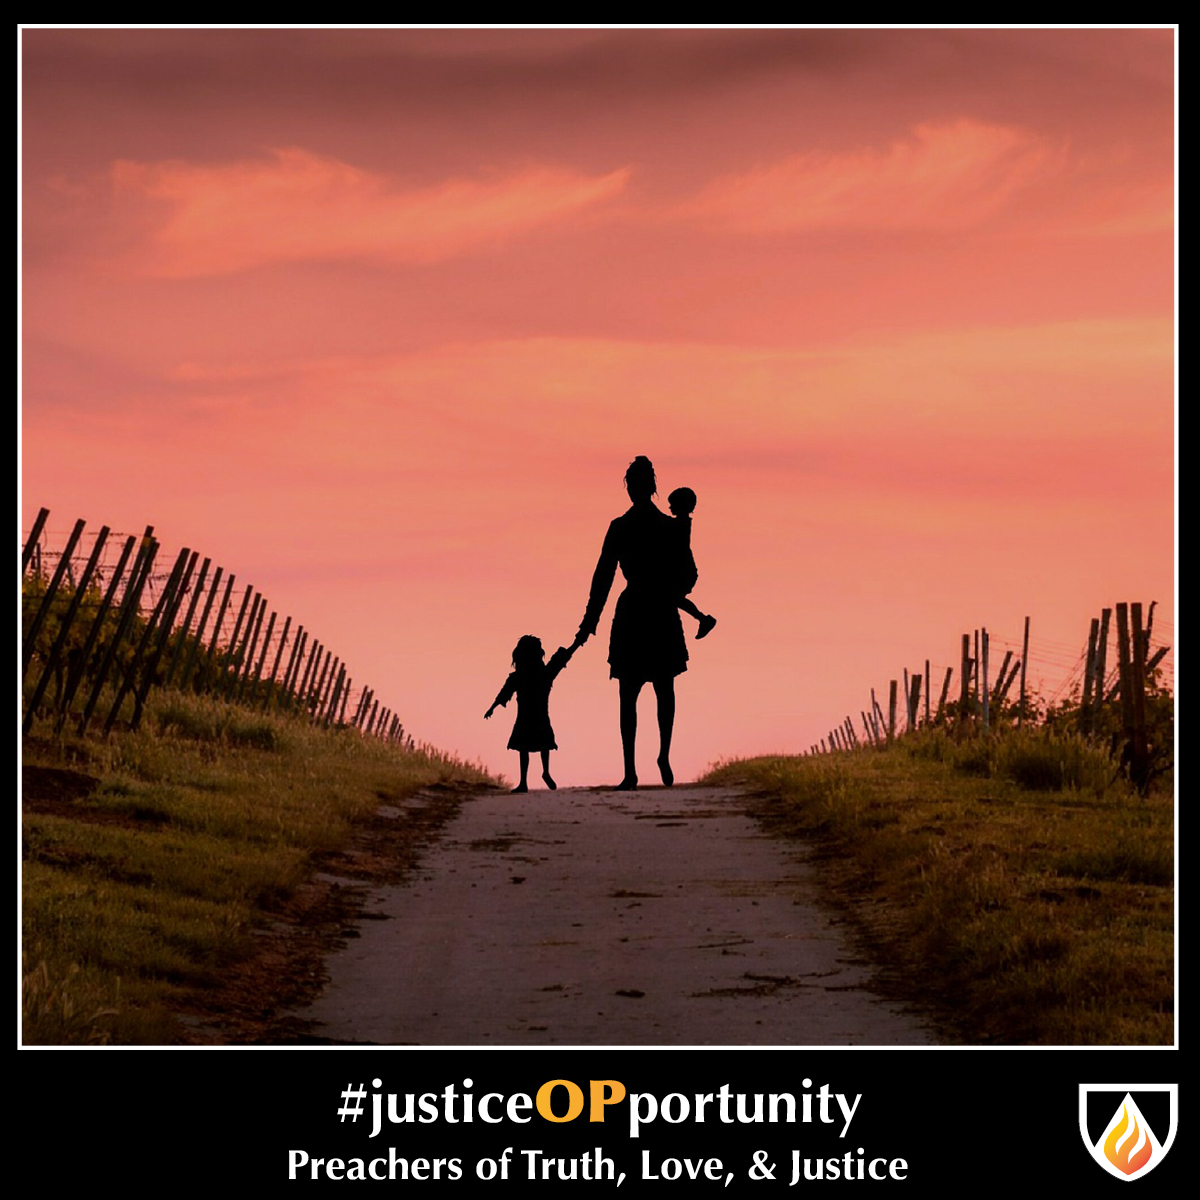 #justiceOPportunity Thursday—January 28, 2021